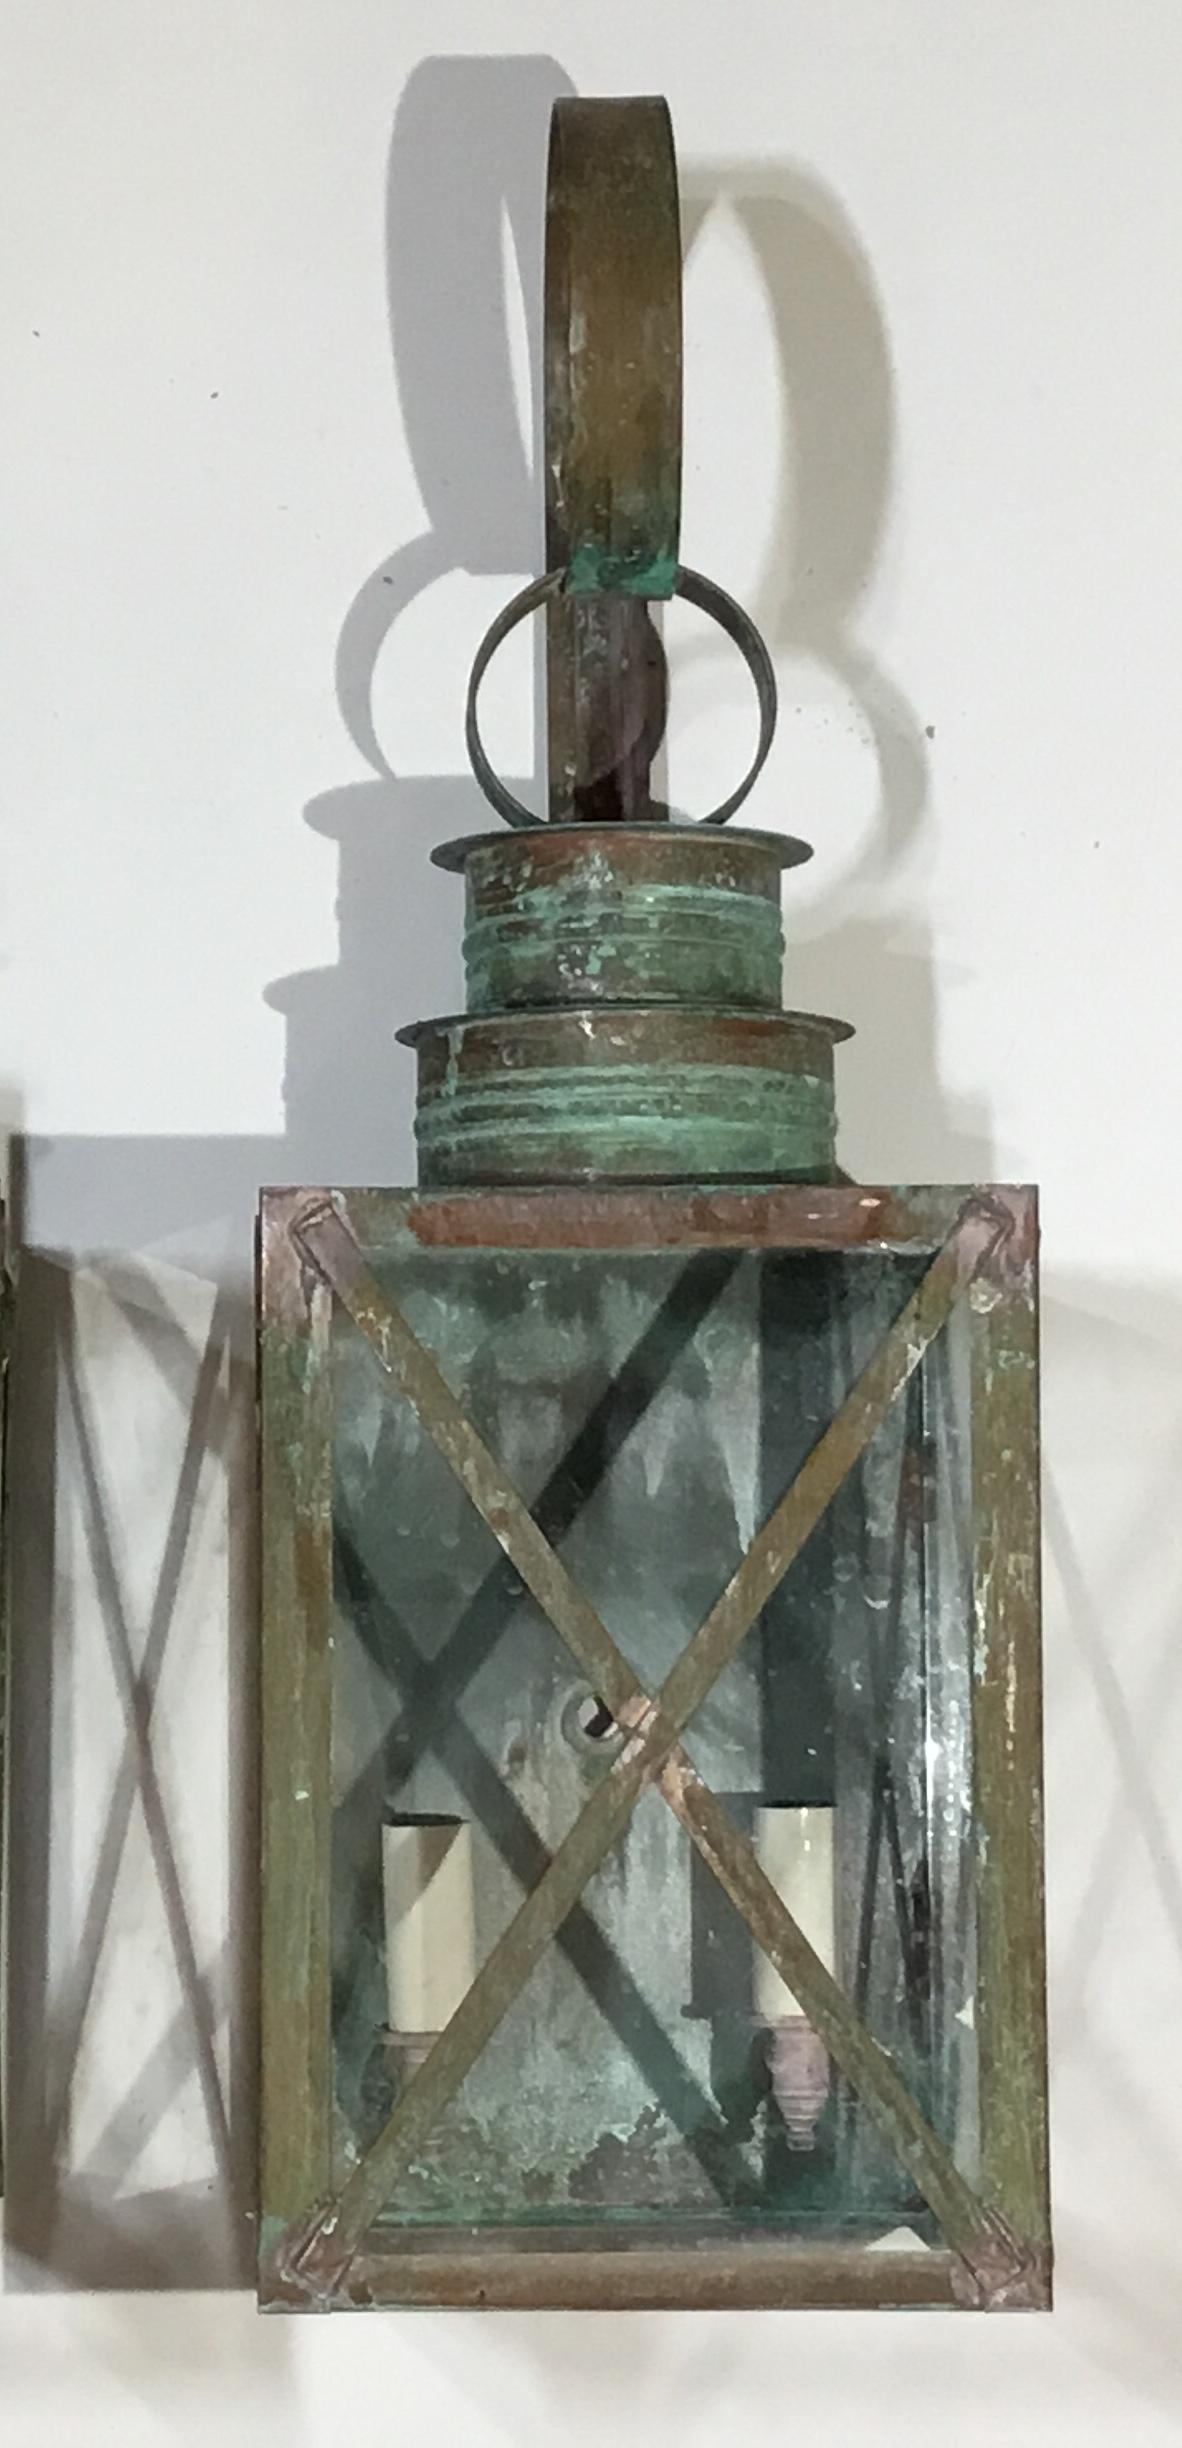 Elegant pair of lantern made of copper electrified and ready to install,
Two 60/watt light on each lantern, up to US code UL approved, suitable for wet locations. Great patina. Will look good outdoors or indoor as wall sconces.